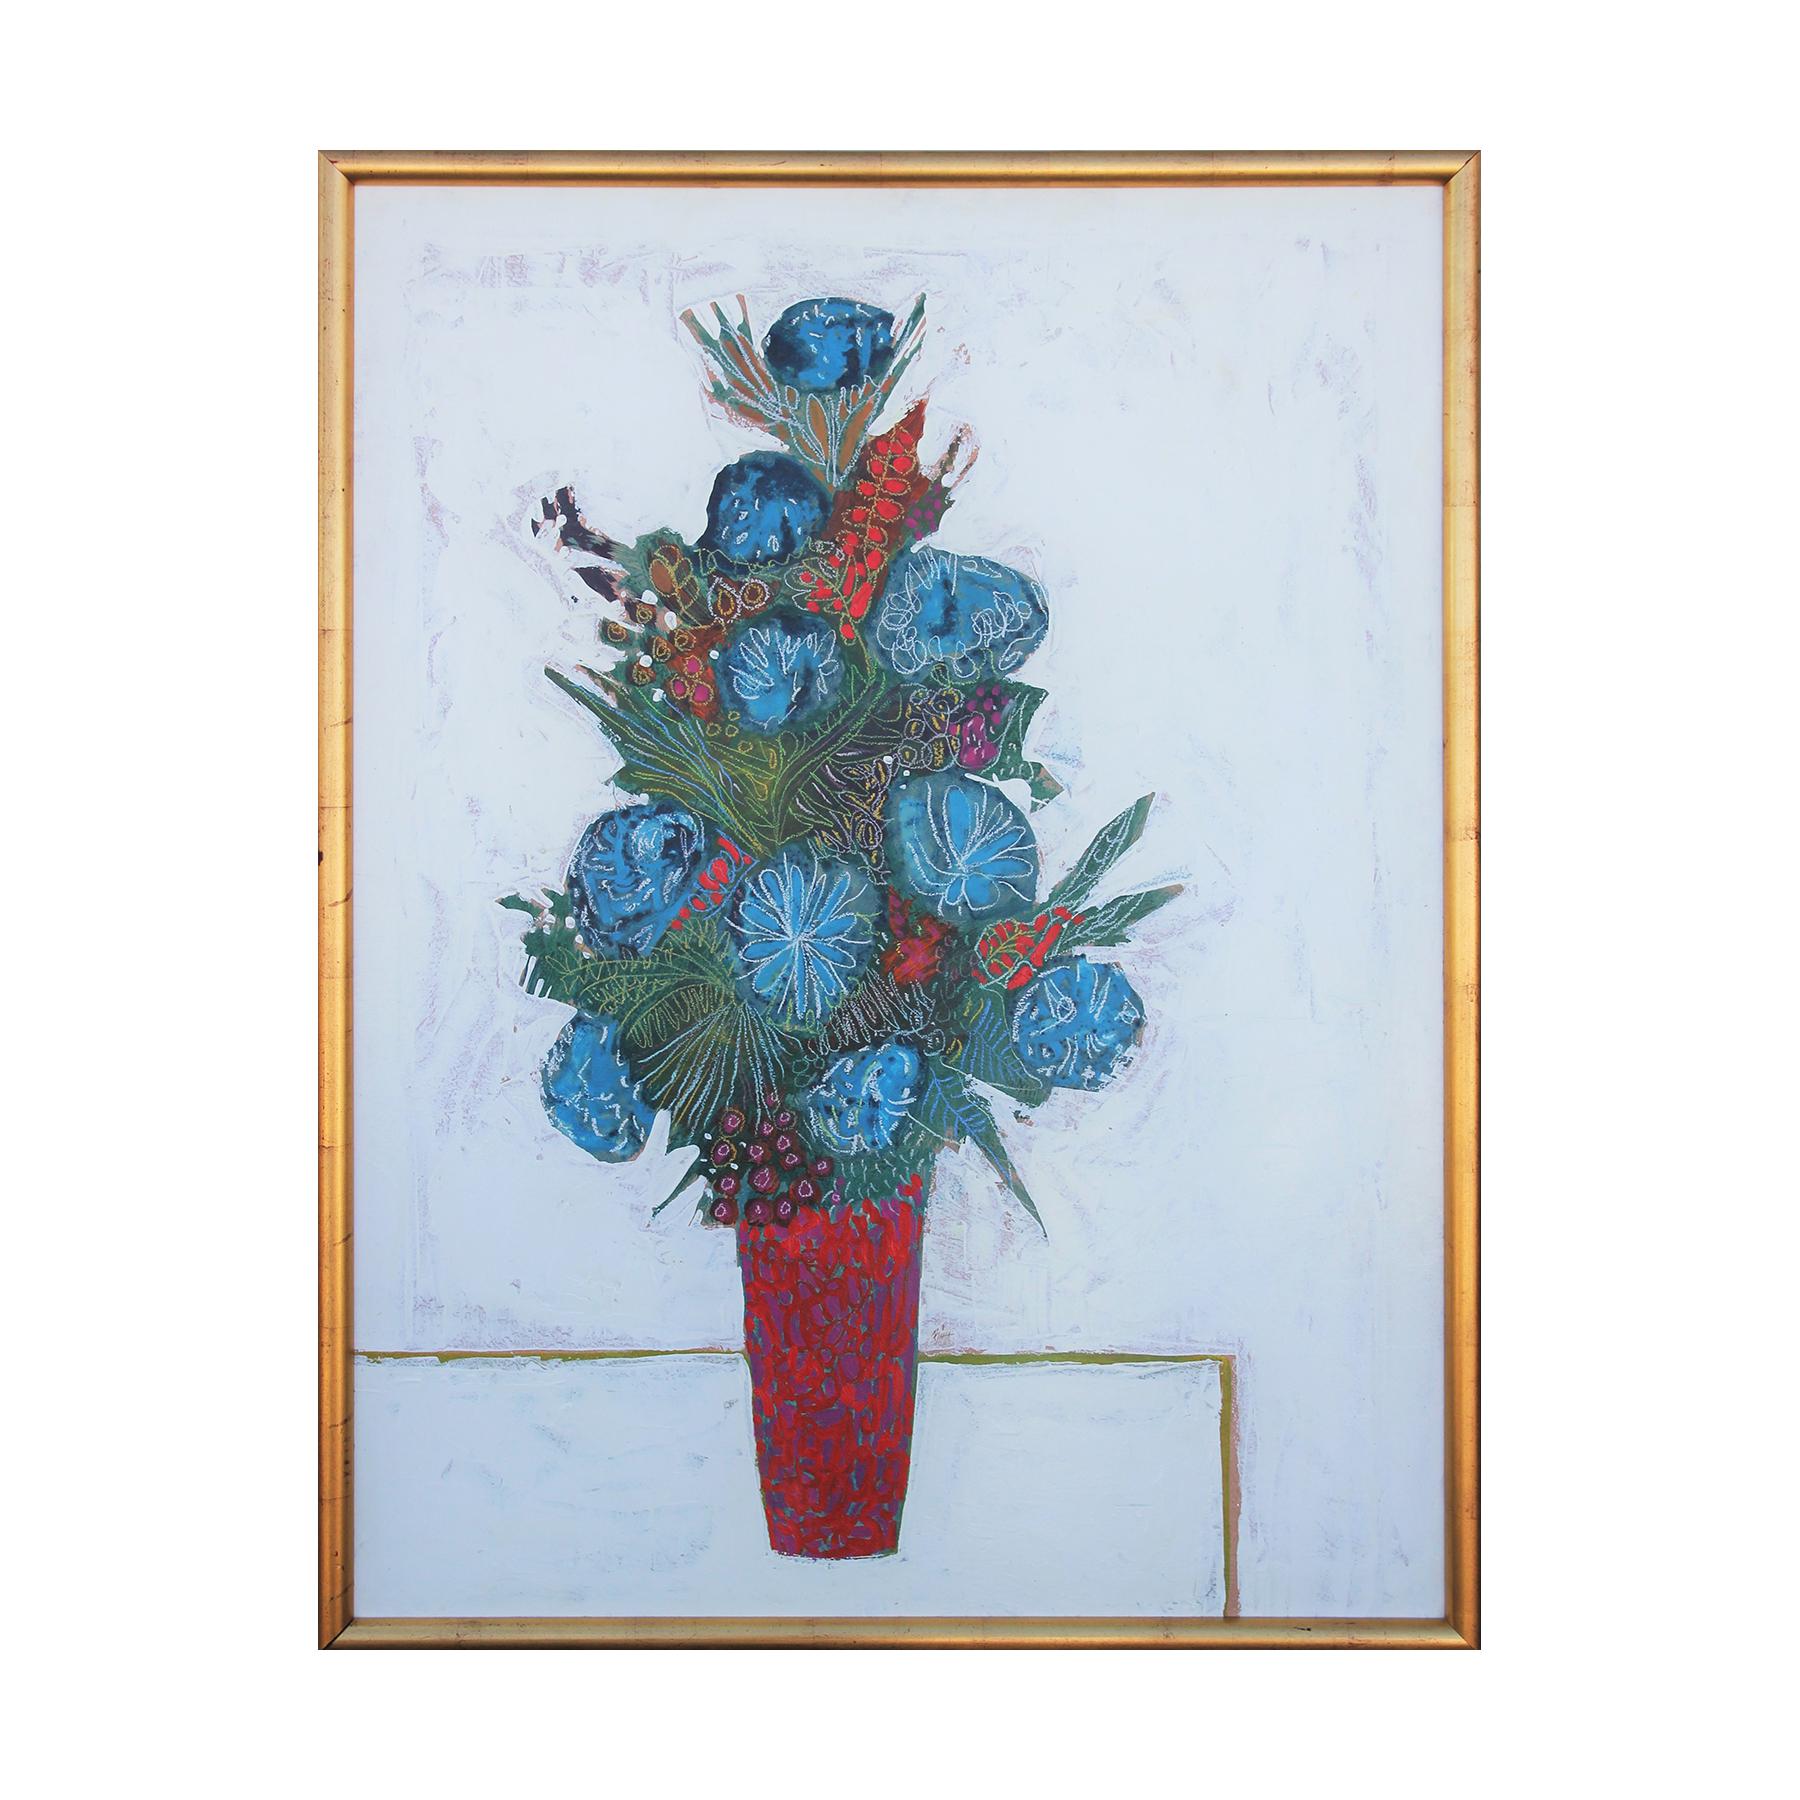 Lamar Briggs Abstract Painting - "The Red Vase" Colorful Red and Blue Modern Abstract Floral Still Life Painting